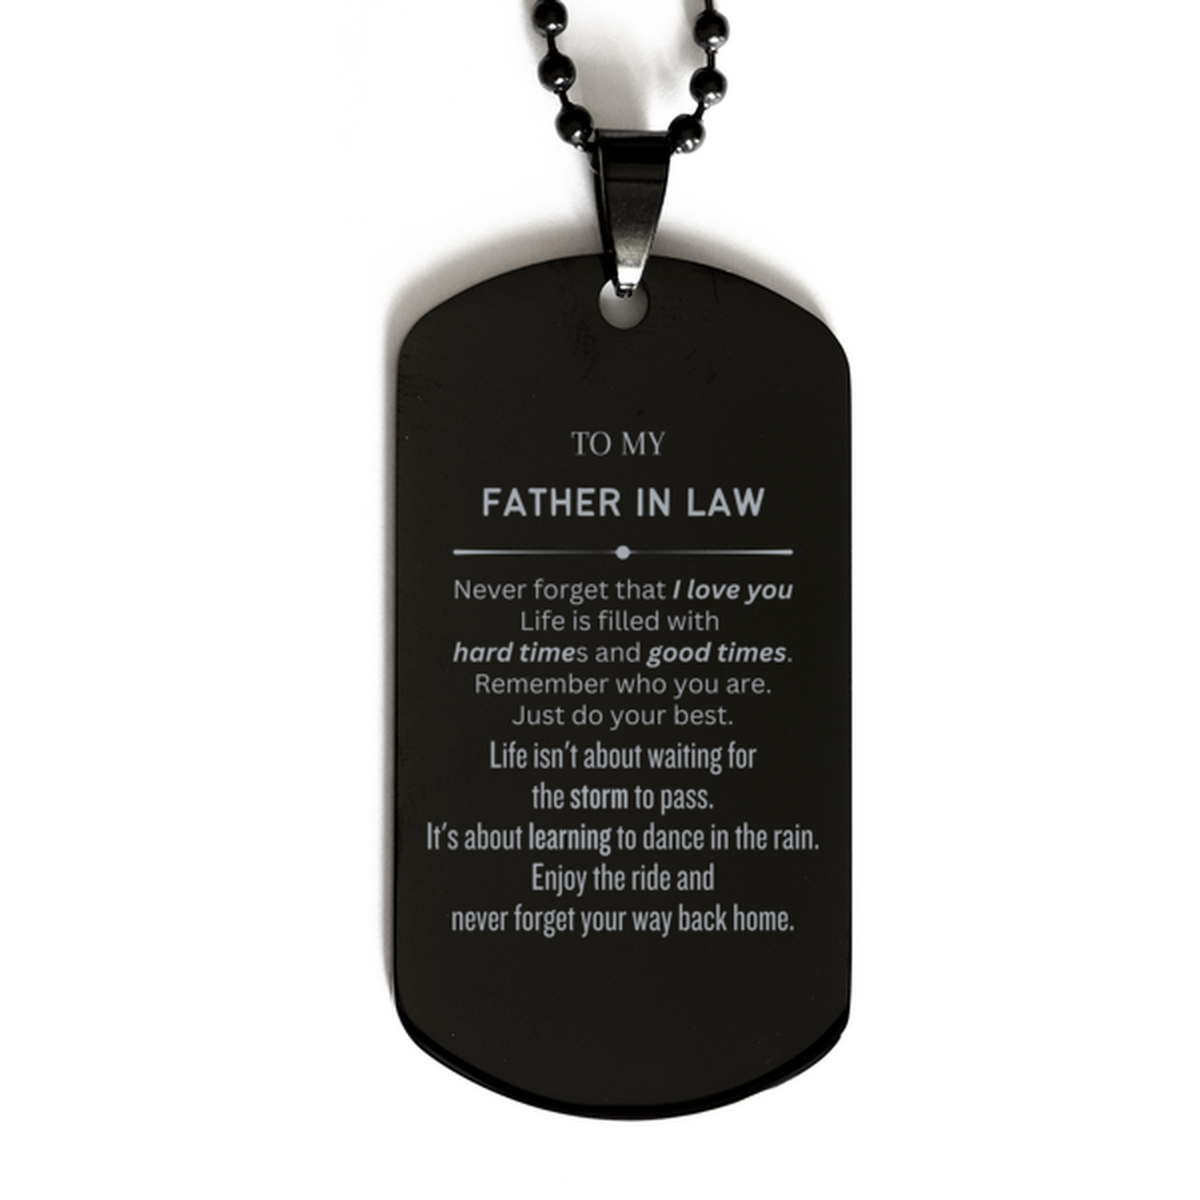 Christmas Father In Law Black Dog Tag Gifts, To My Father In Law Birthday Thank You Gifts For Father In Law, Graduation Unique Gifts For Father In Law To My Father In Law Never forget that I love you life is filled with hard times and good times. Remember